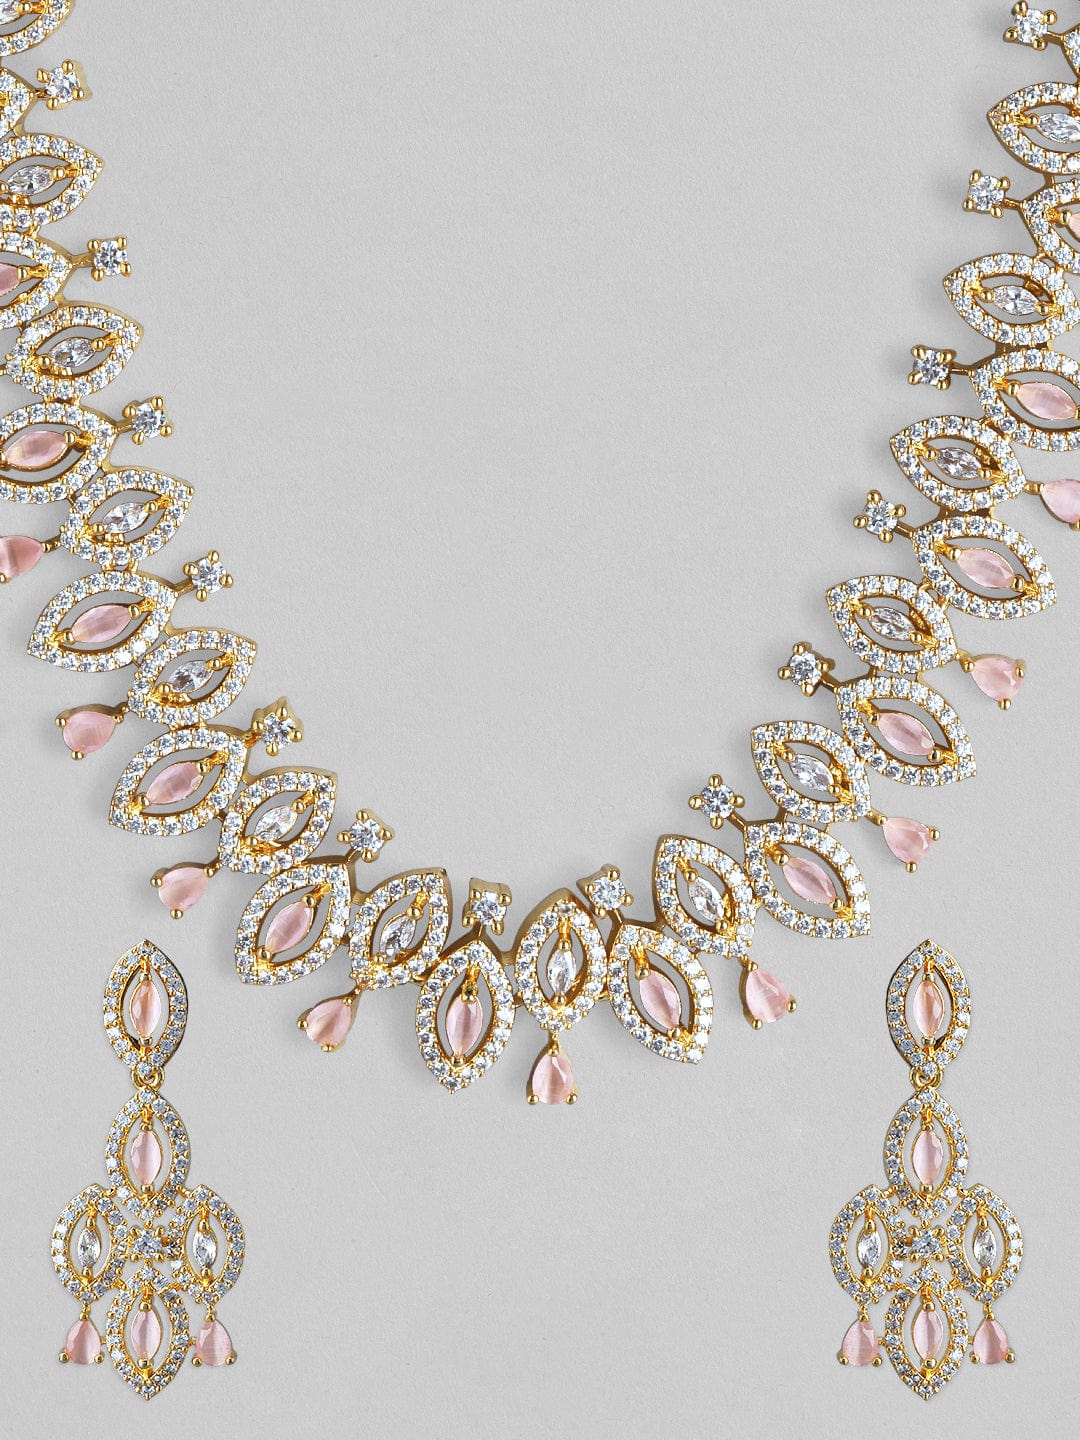 Rubans Gold Plated Handcrafted AD Stone Pink Studded Necklace Set. Necklace Set